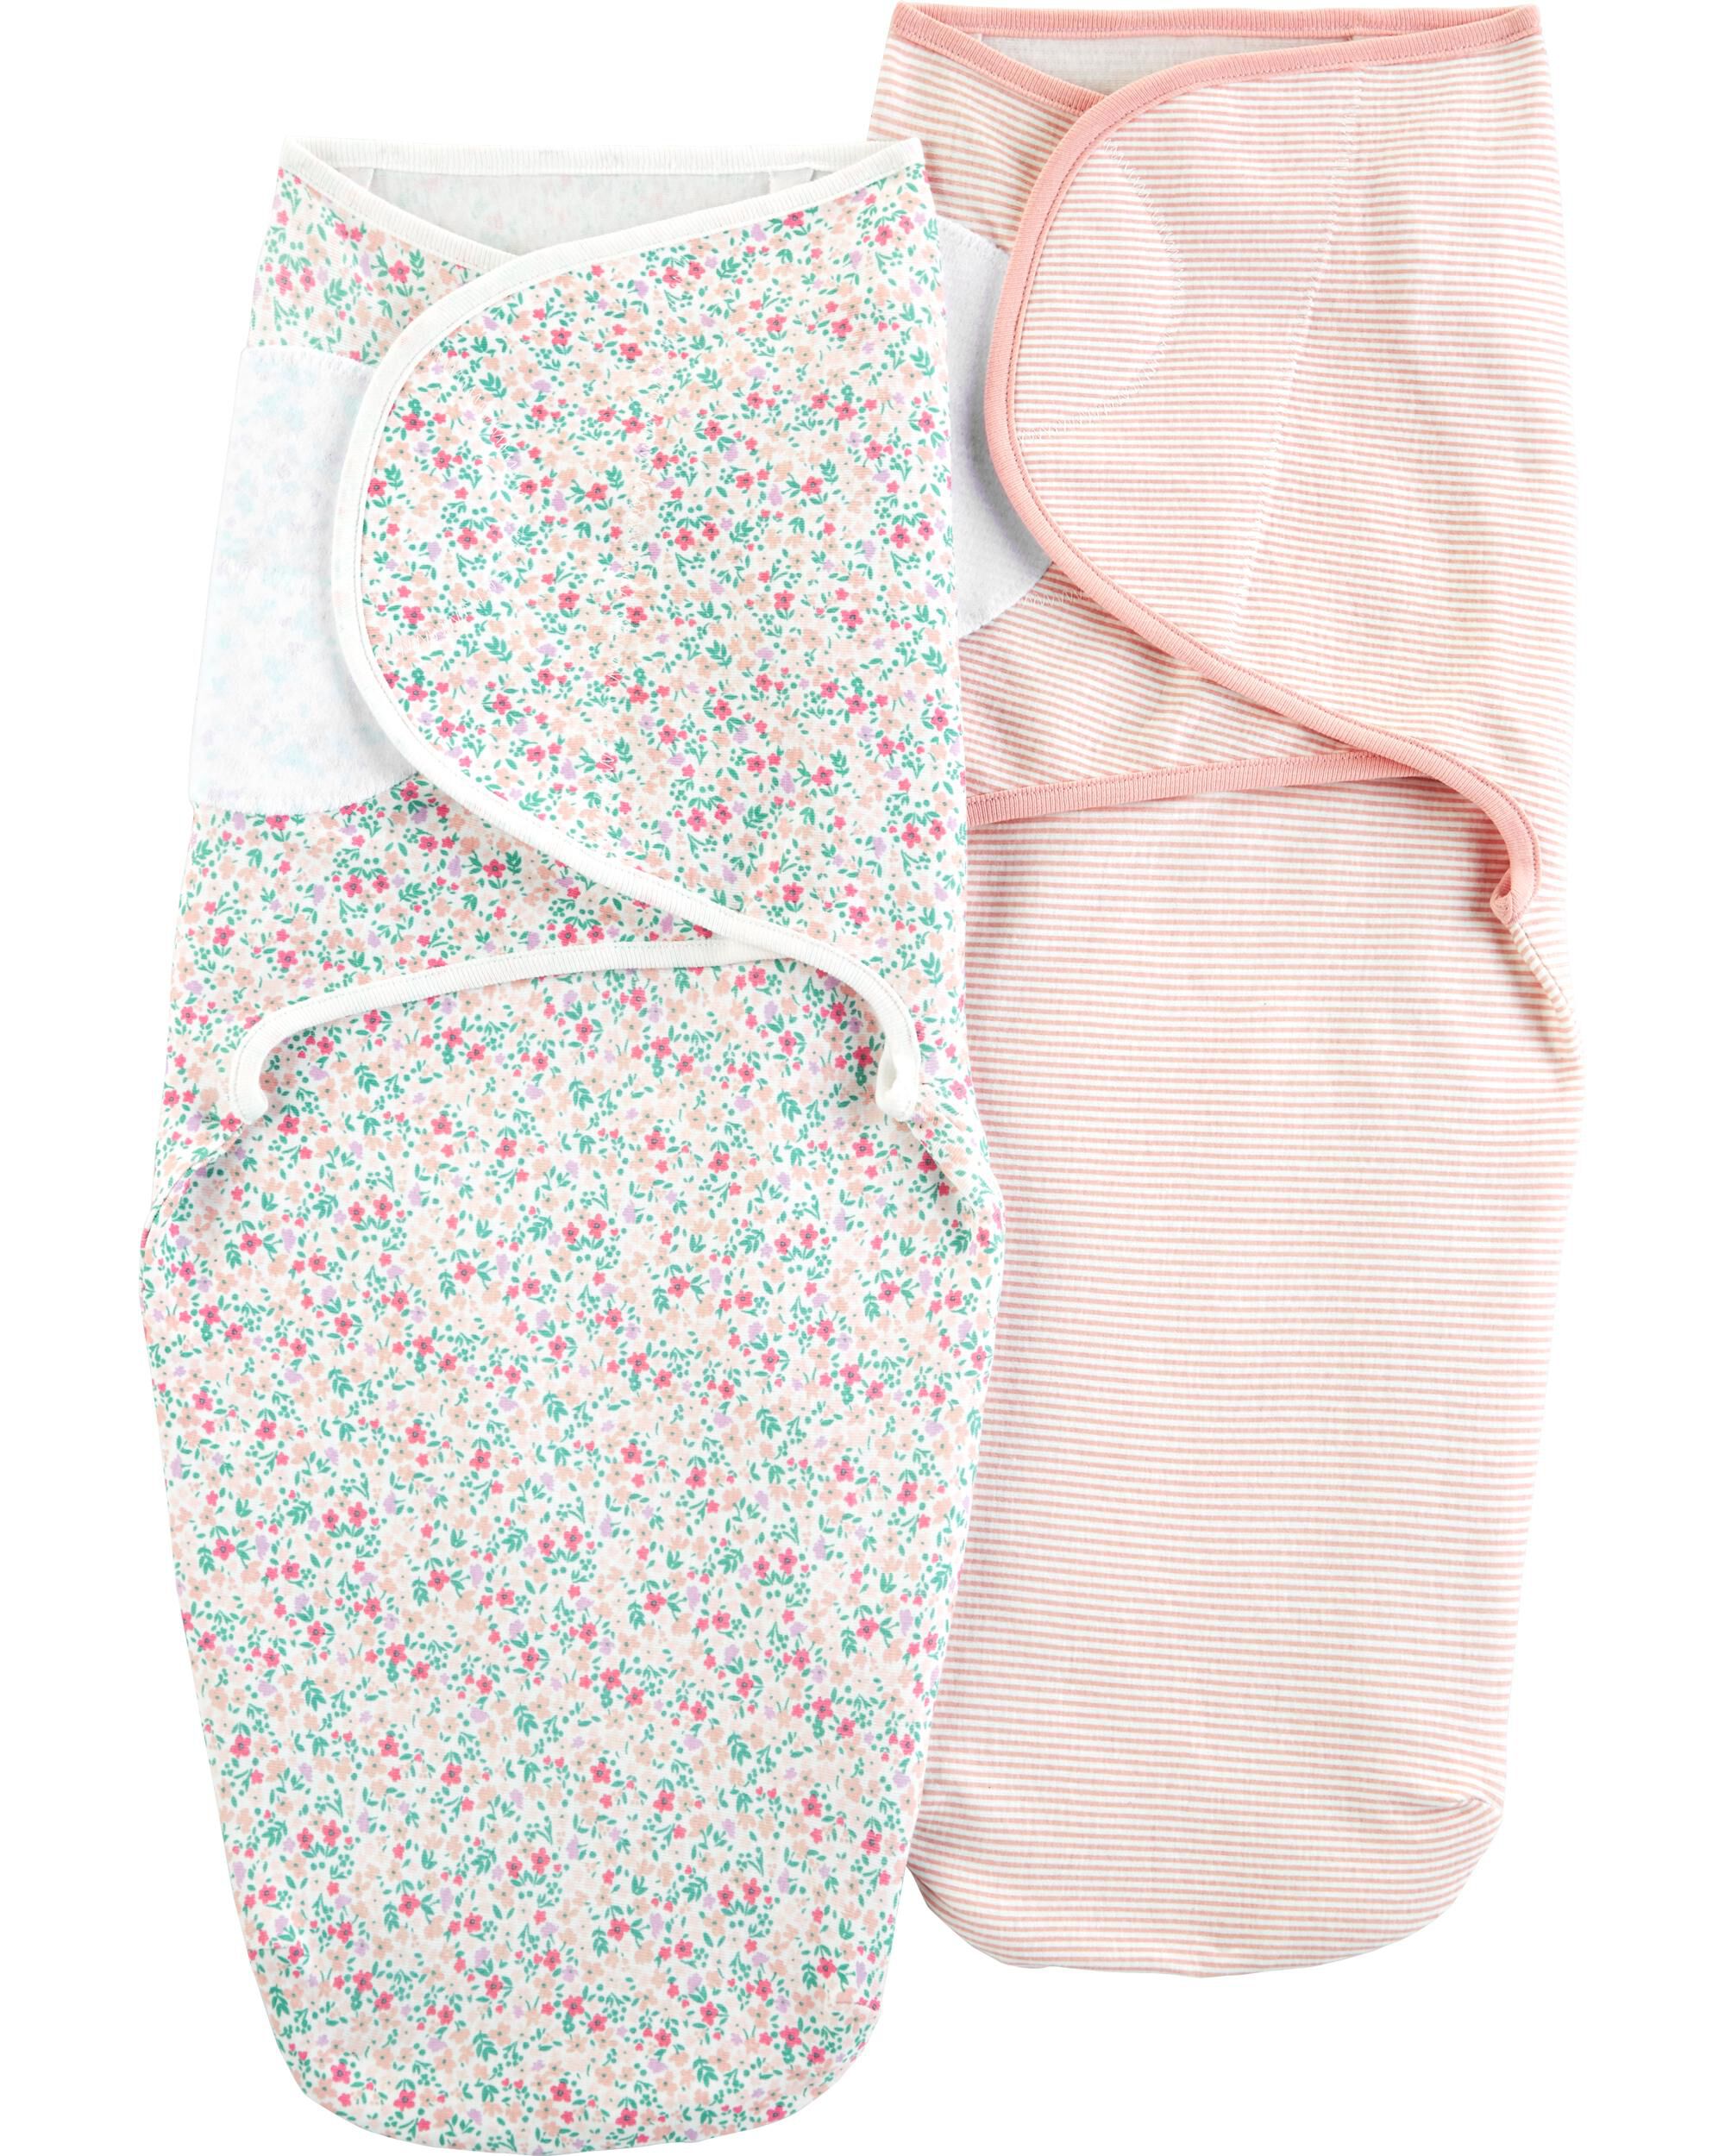 2-Pack Swaddle Blankets | carters.com